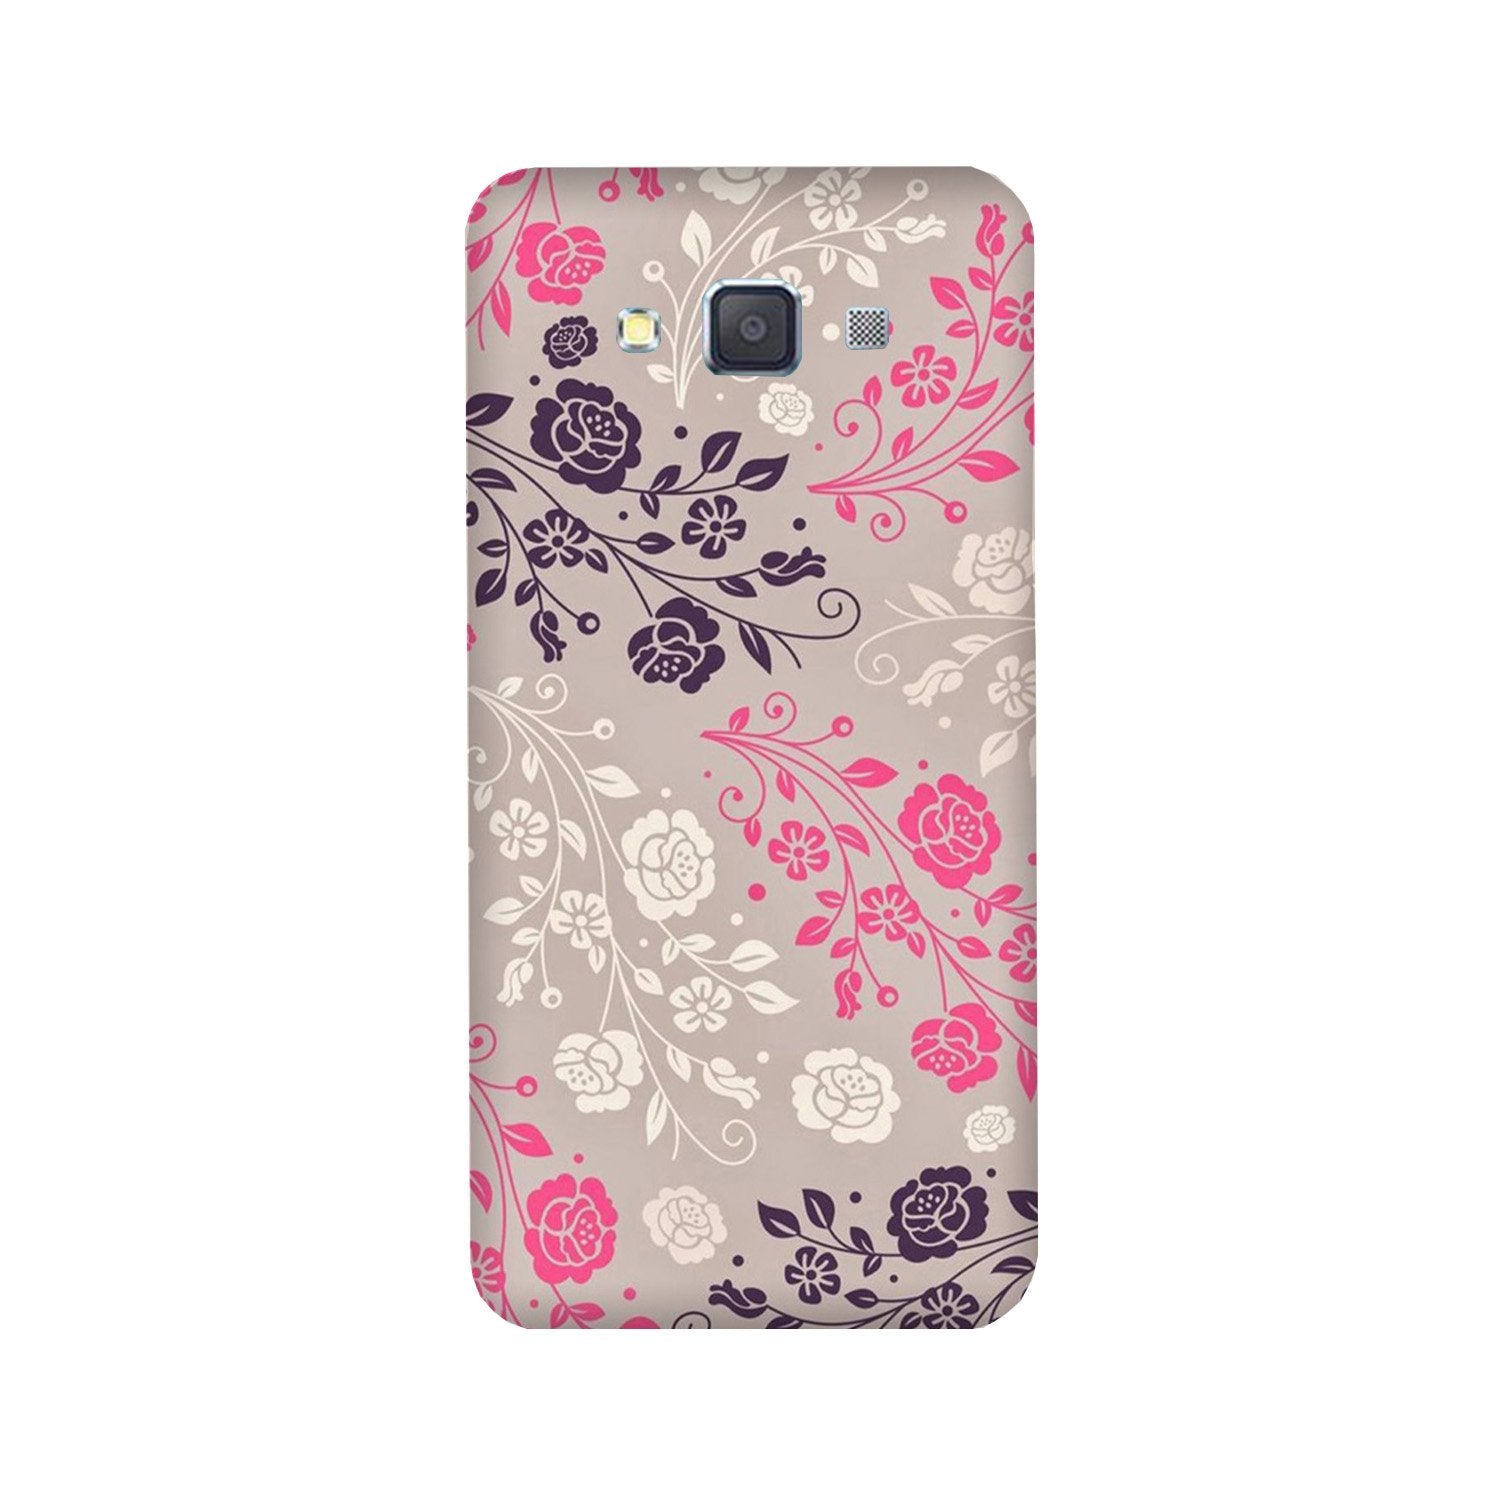 Pattern2 Case for Galaxy Grand Max